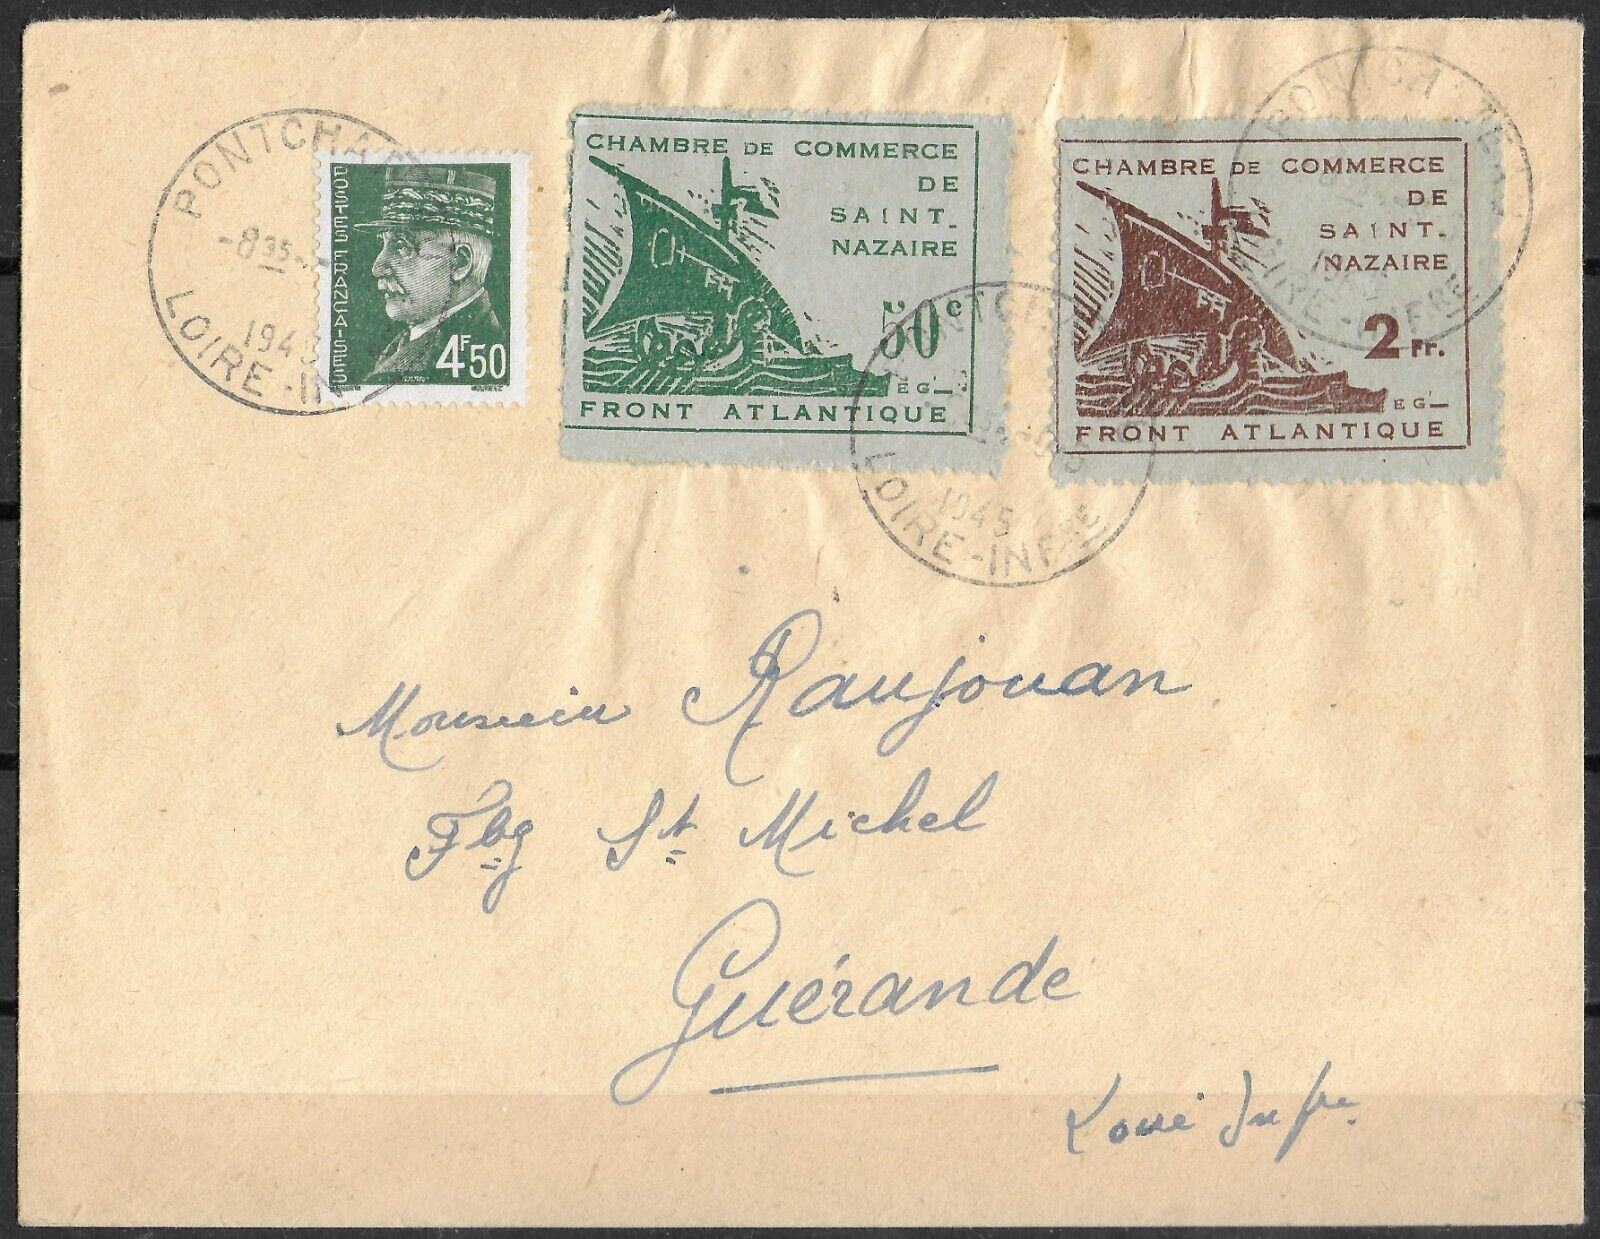 SAINT NAZAIRE FRANCE 1945 Cover with Set of 3 Stamps Yvert 12 CV 780 VF